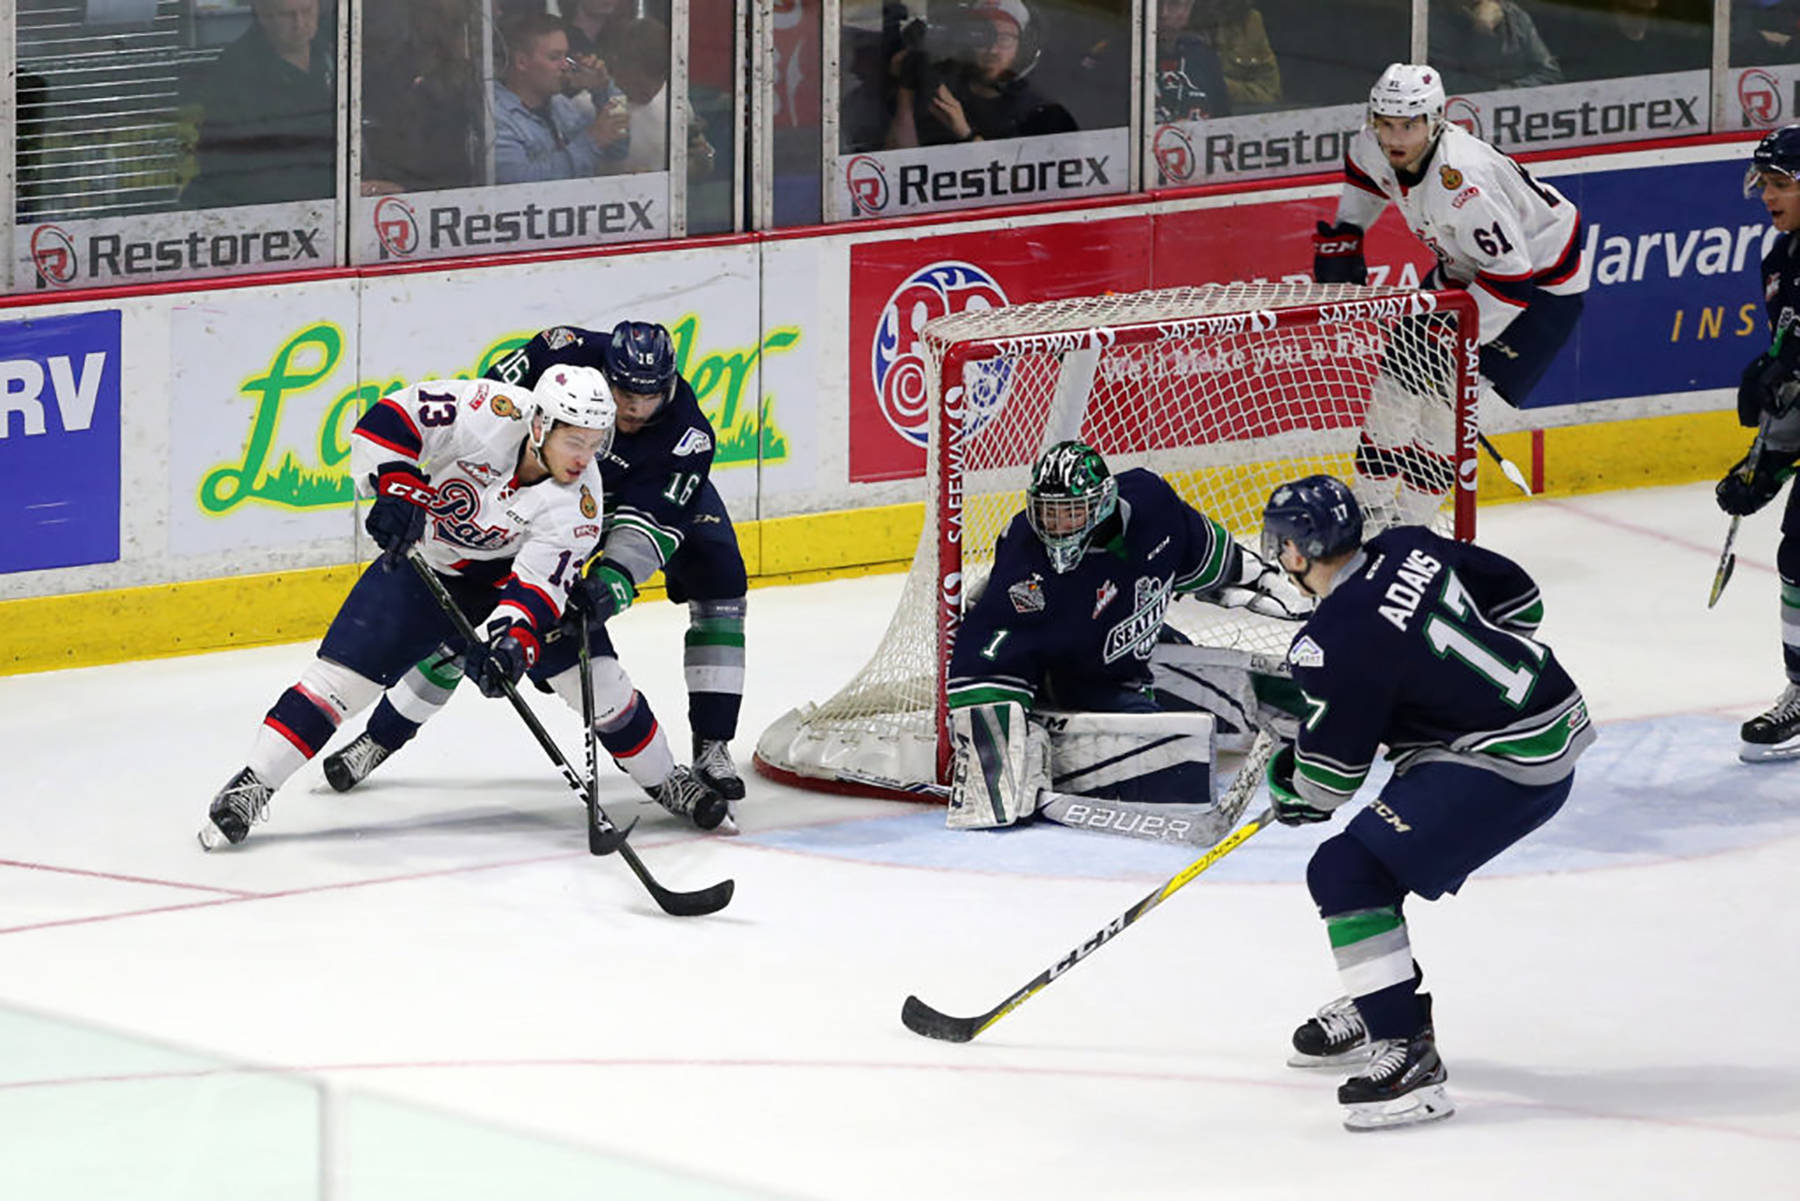 The Pats’ Wyatt Sloboshan tries to position himself to take a shot as the Thunderbirds defense collapses during Game ! action of the WHL championship series Friday night in Regina, Saskatchewan. COURTESY PHOTO, Keith Hershmiller